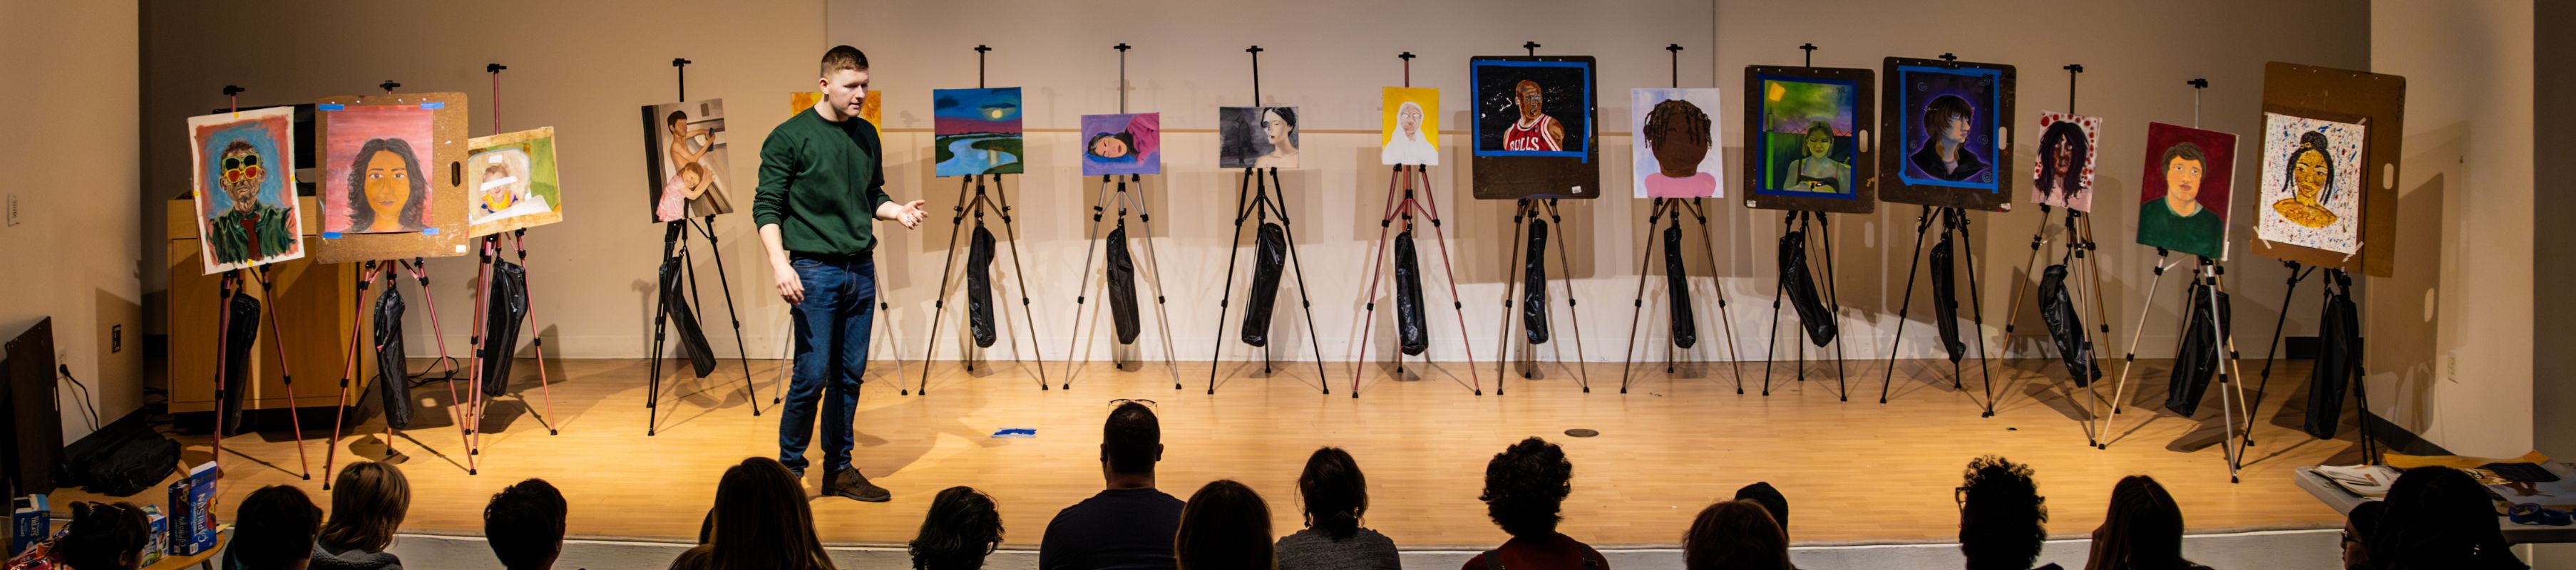 a collection of student artwork displayed on a stage